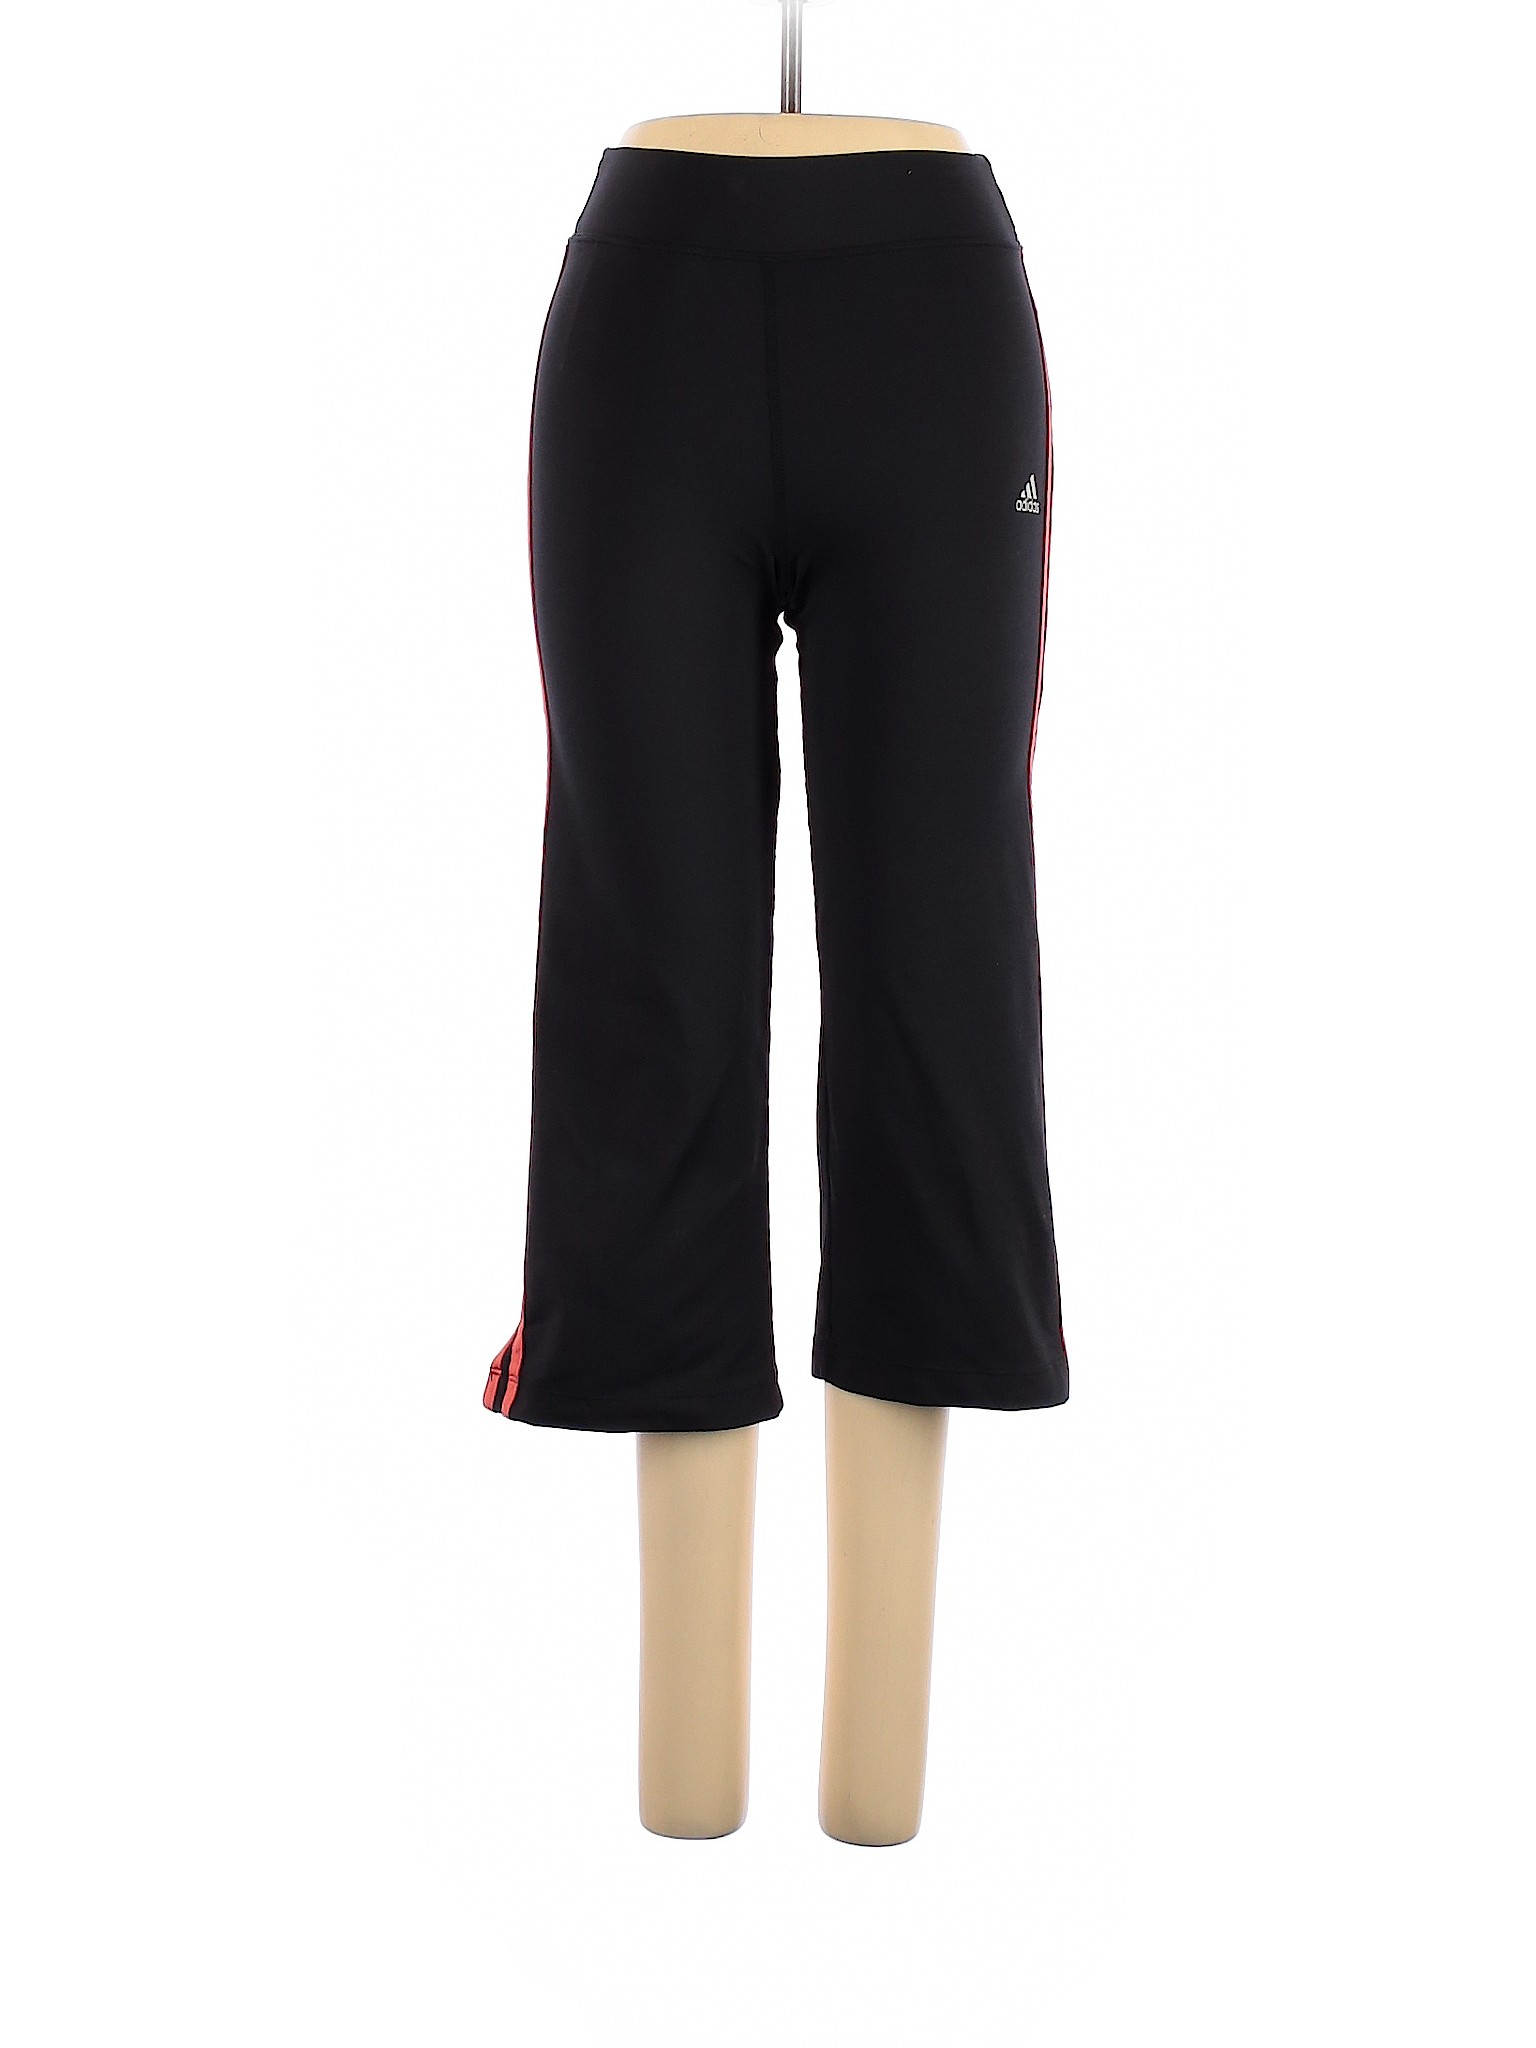 Adidas Solid Black Active Pants Size S - 74% off | thredUP